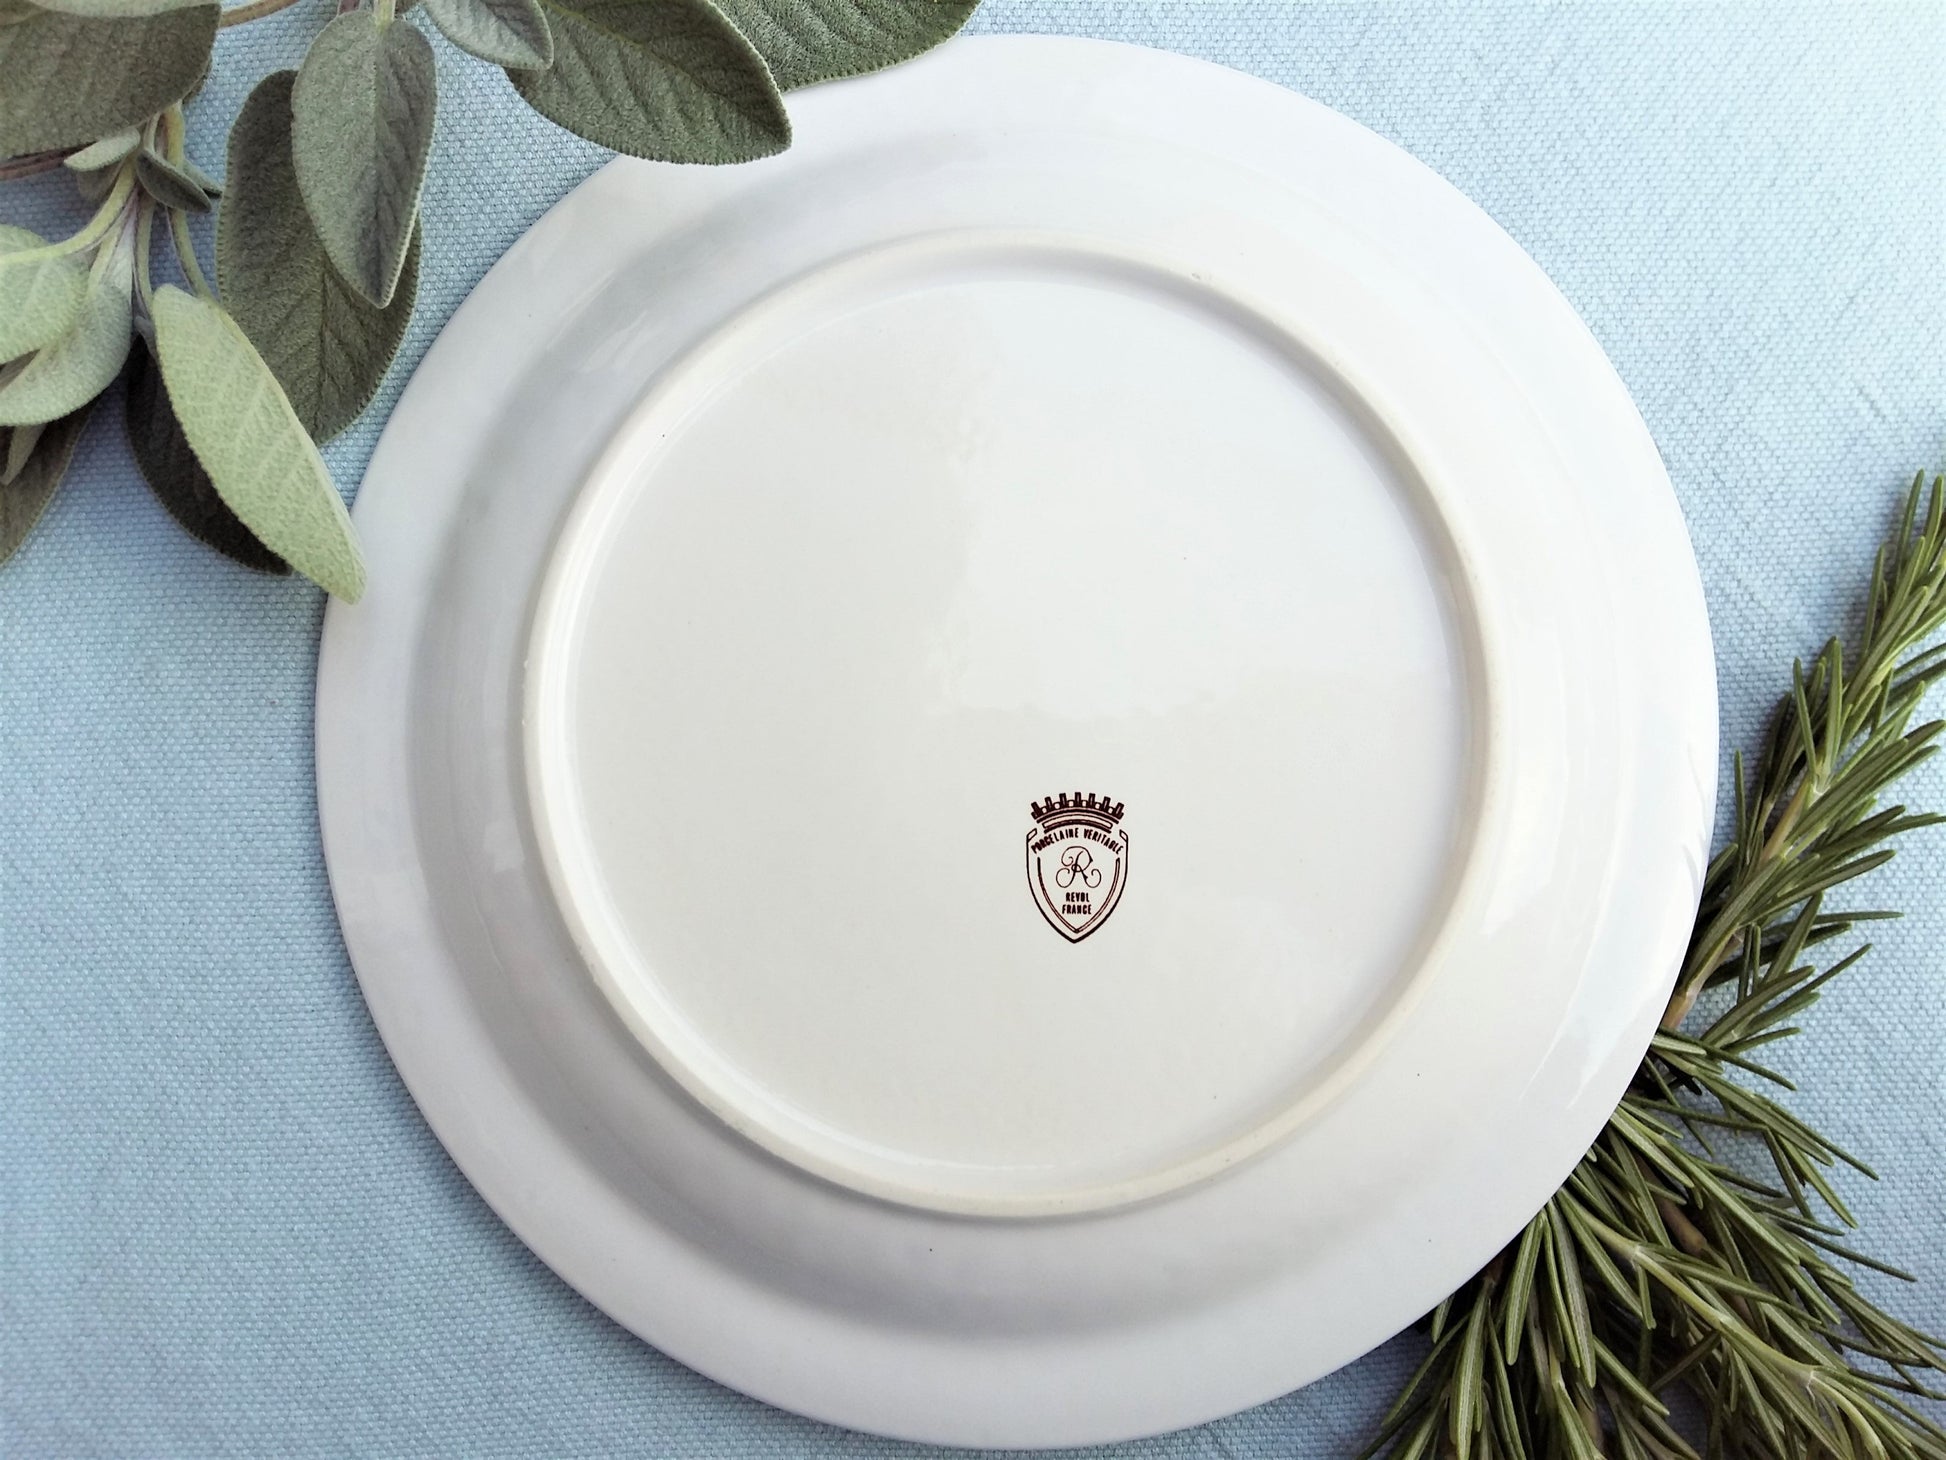 Six French, Mid Century, Foie Gras Entrée Plates. Foie Gras Recipe Plates. from Tiggy & Pip - €120.00! Shop now at Tiggy and Pip